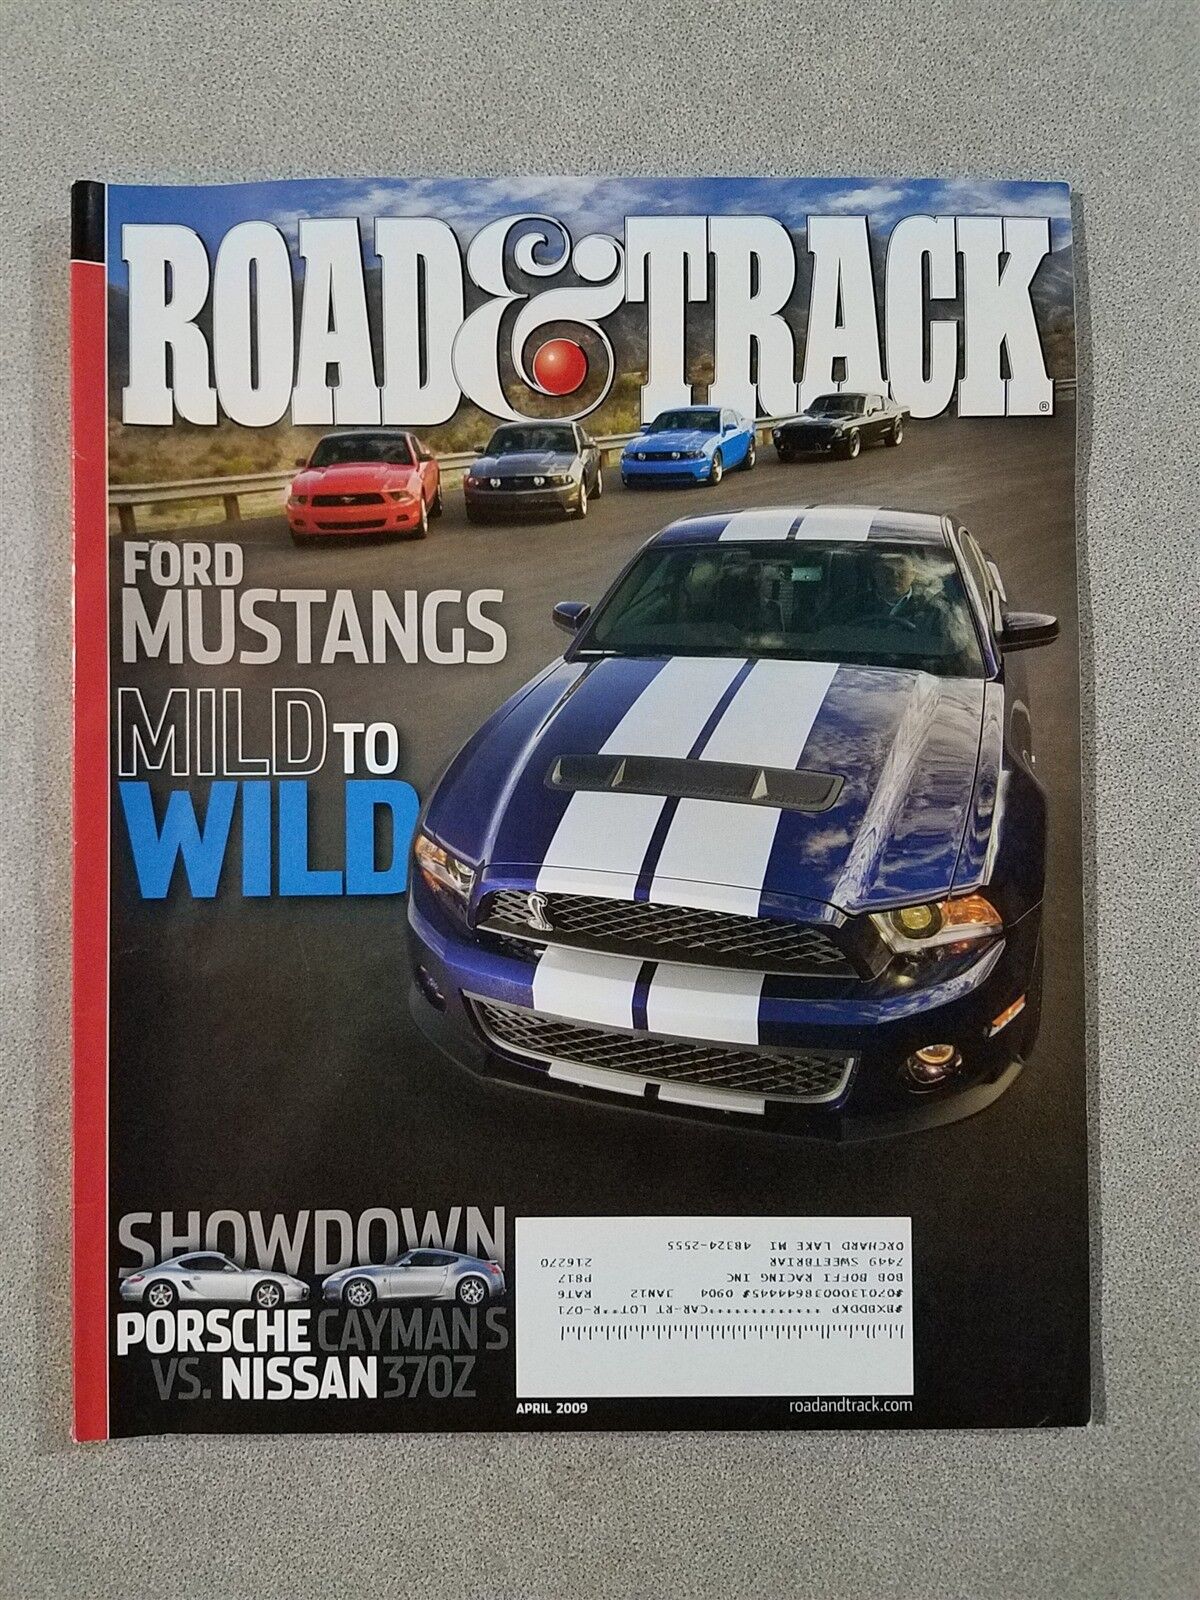 Road & Track Magazine April 2009 Ford Mustang GT & 1967 Fastback Porsche Cayman 